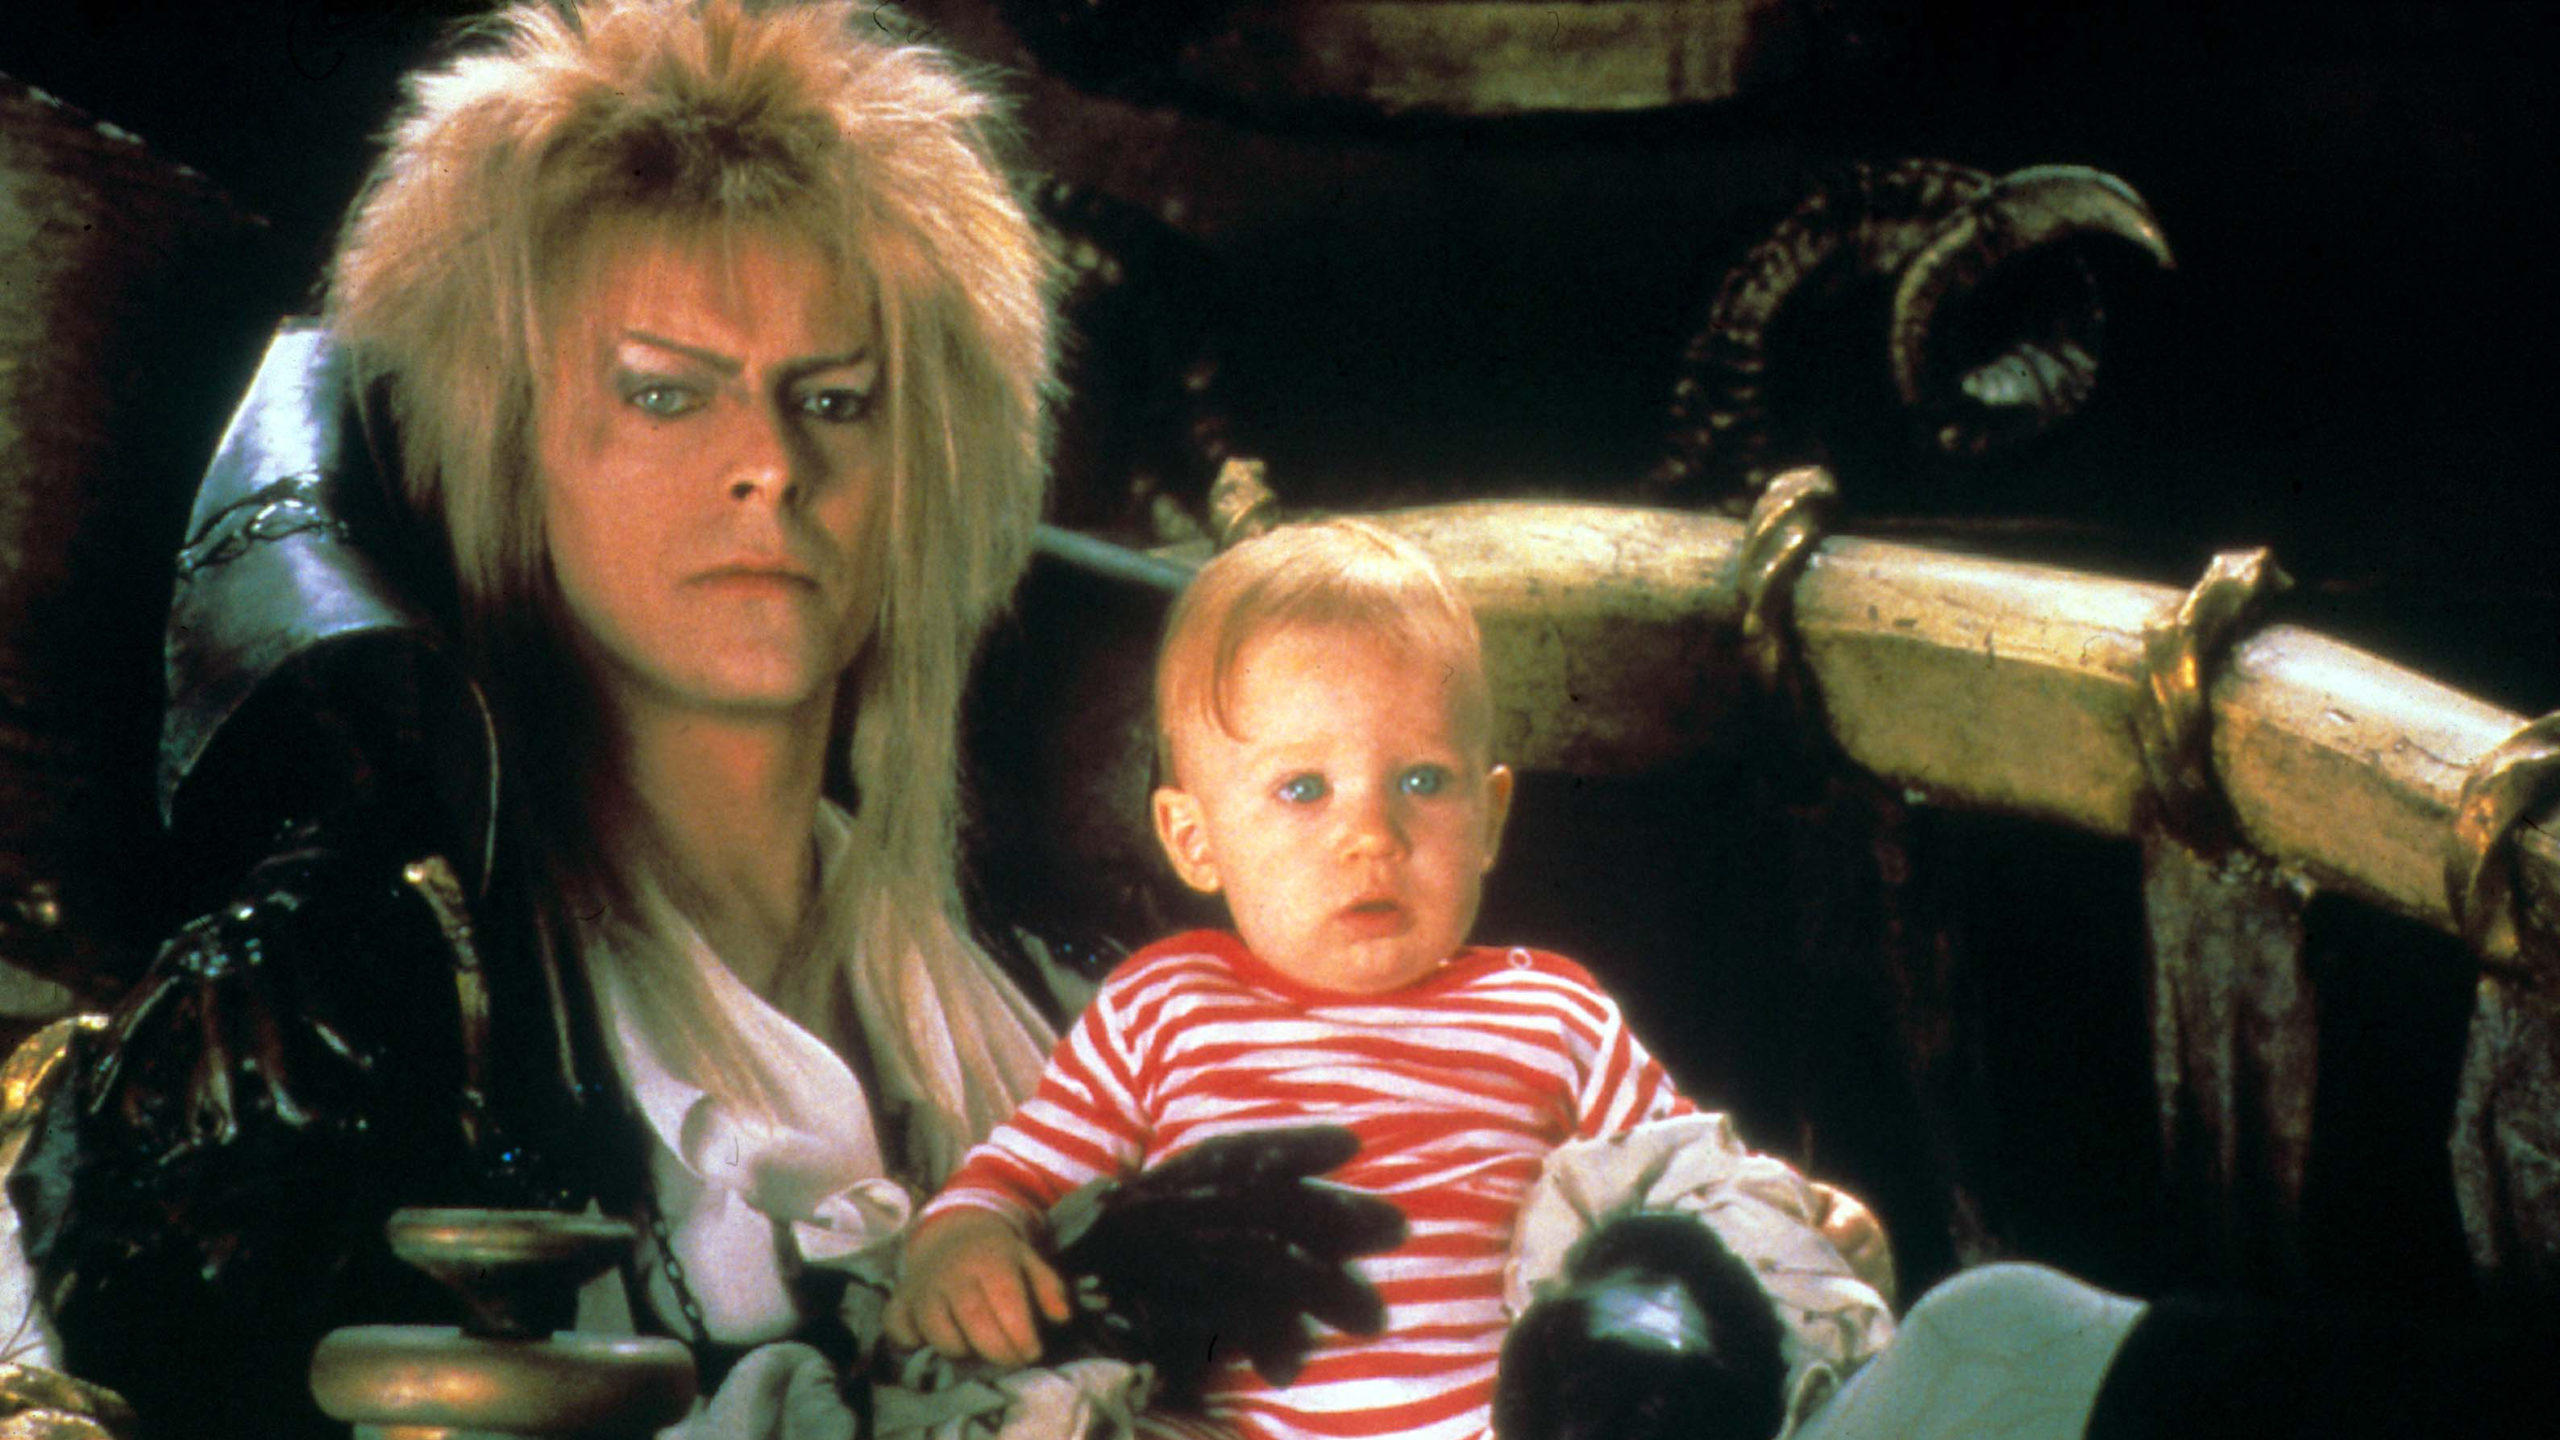 David Bowie, as Jareth, sits with the kidnapped baby. The baby looks totally comfortable.